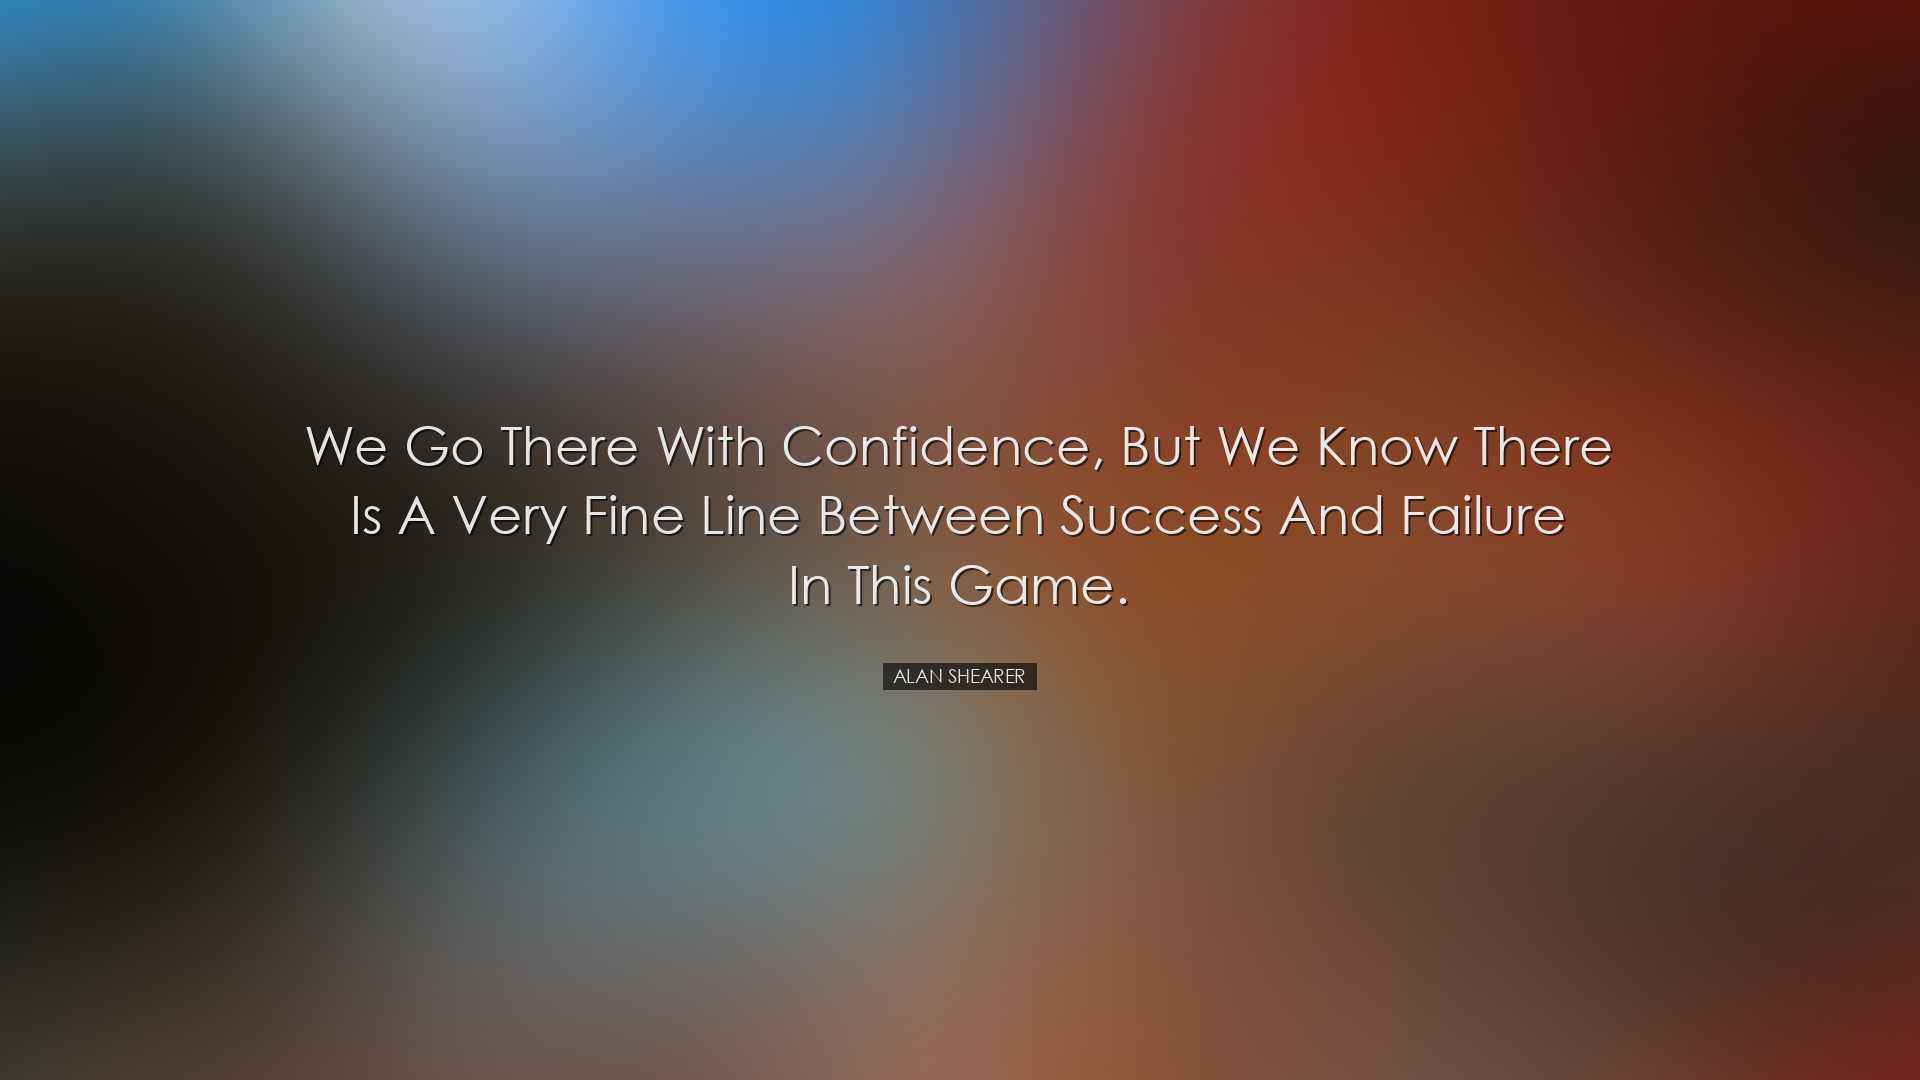 We go there with confidence, but we know there is a very fine line